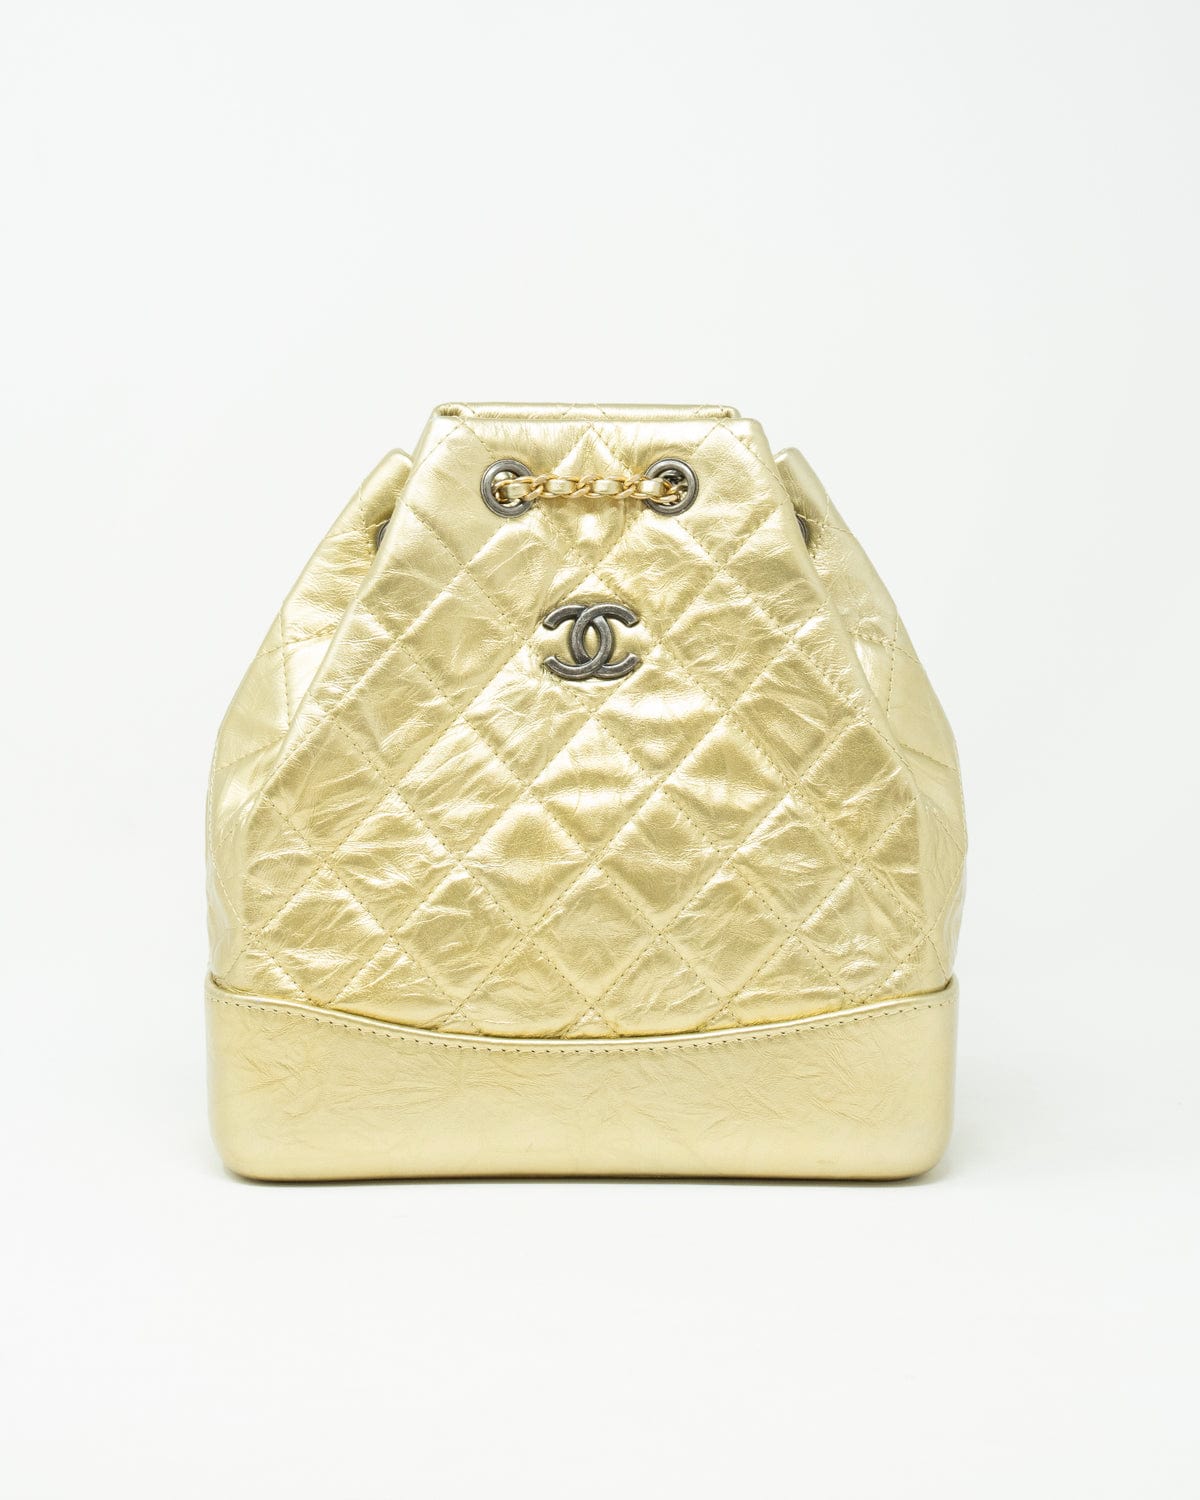 My Chanel Gabrielle Backpack (Wear & Tear Review + Mini Cartier Unboxing) 